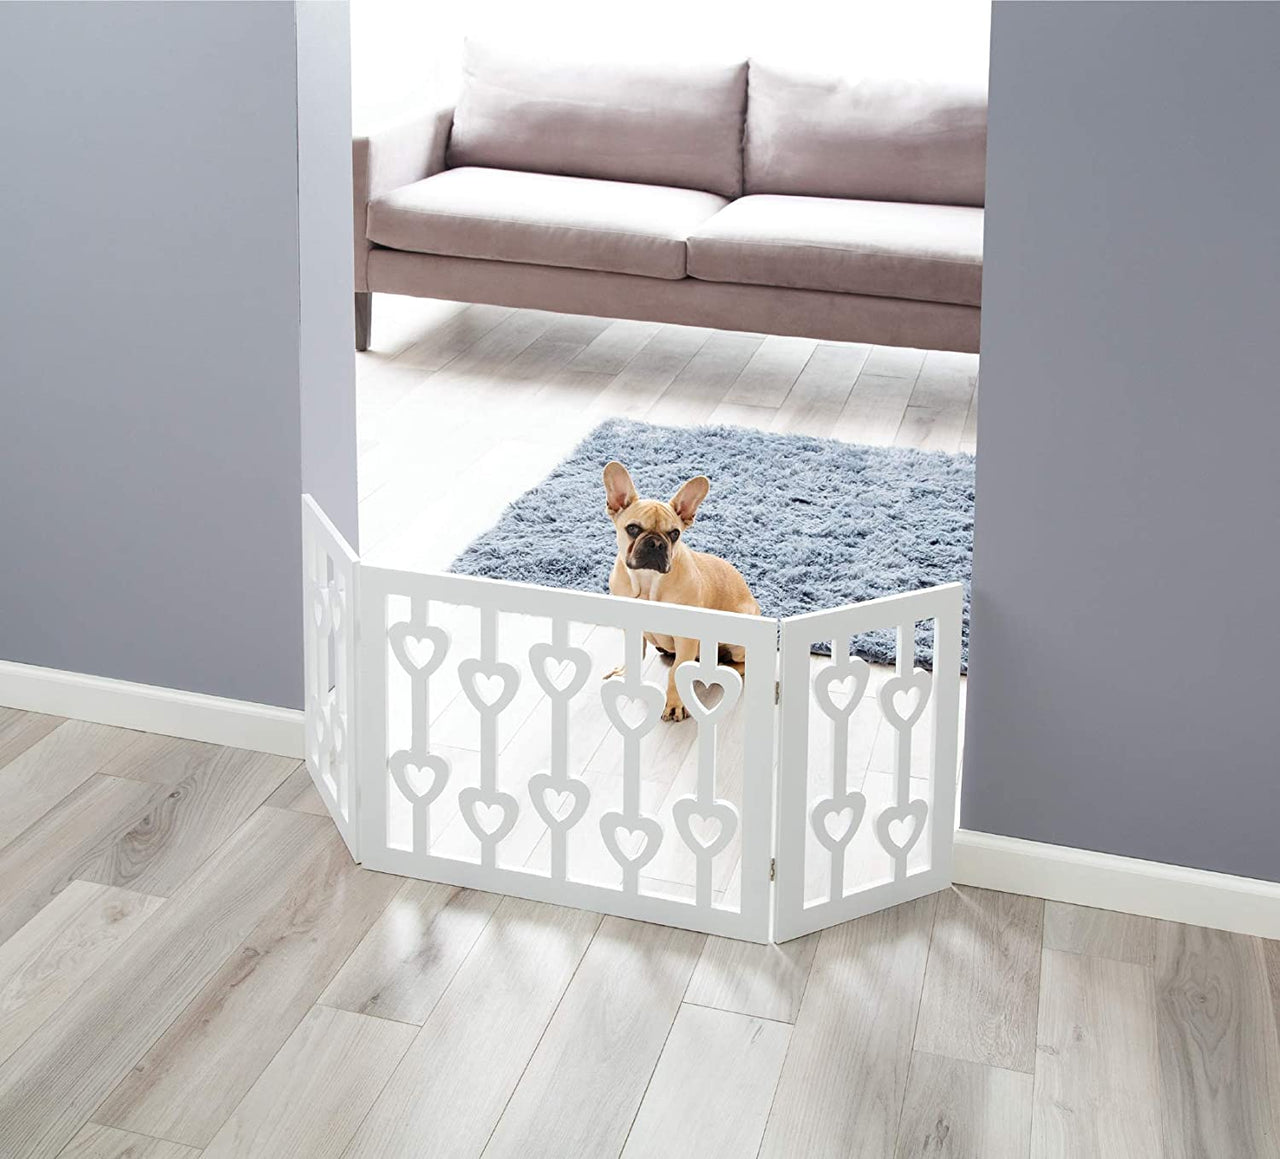 Wooden Fold-able Extra wide Pet Gate Baby Fence Extension Kids Safety Gate for The House, Doorway, Stairs | Indoor Dog Gate Dime Store